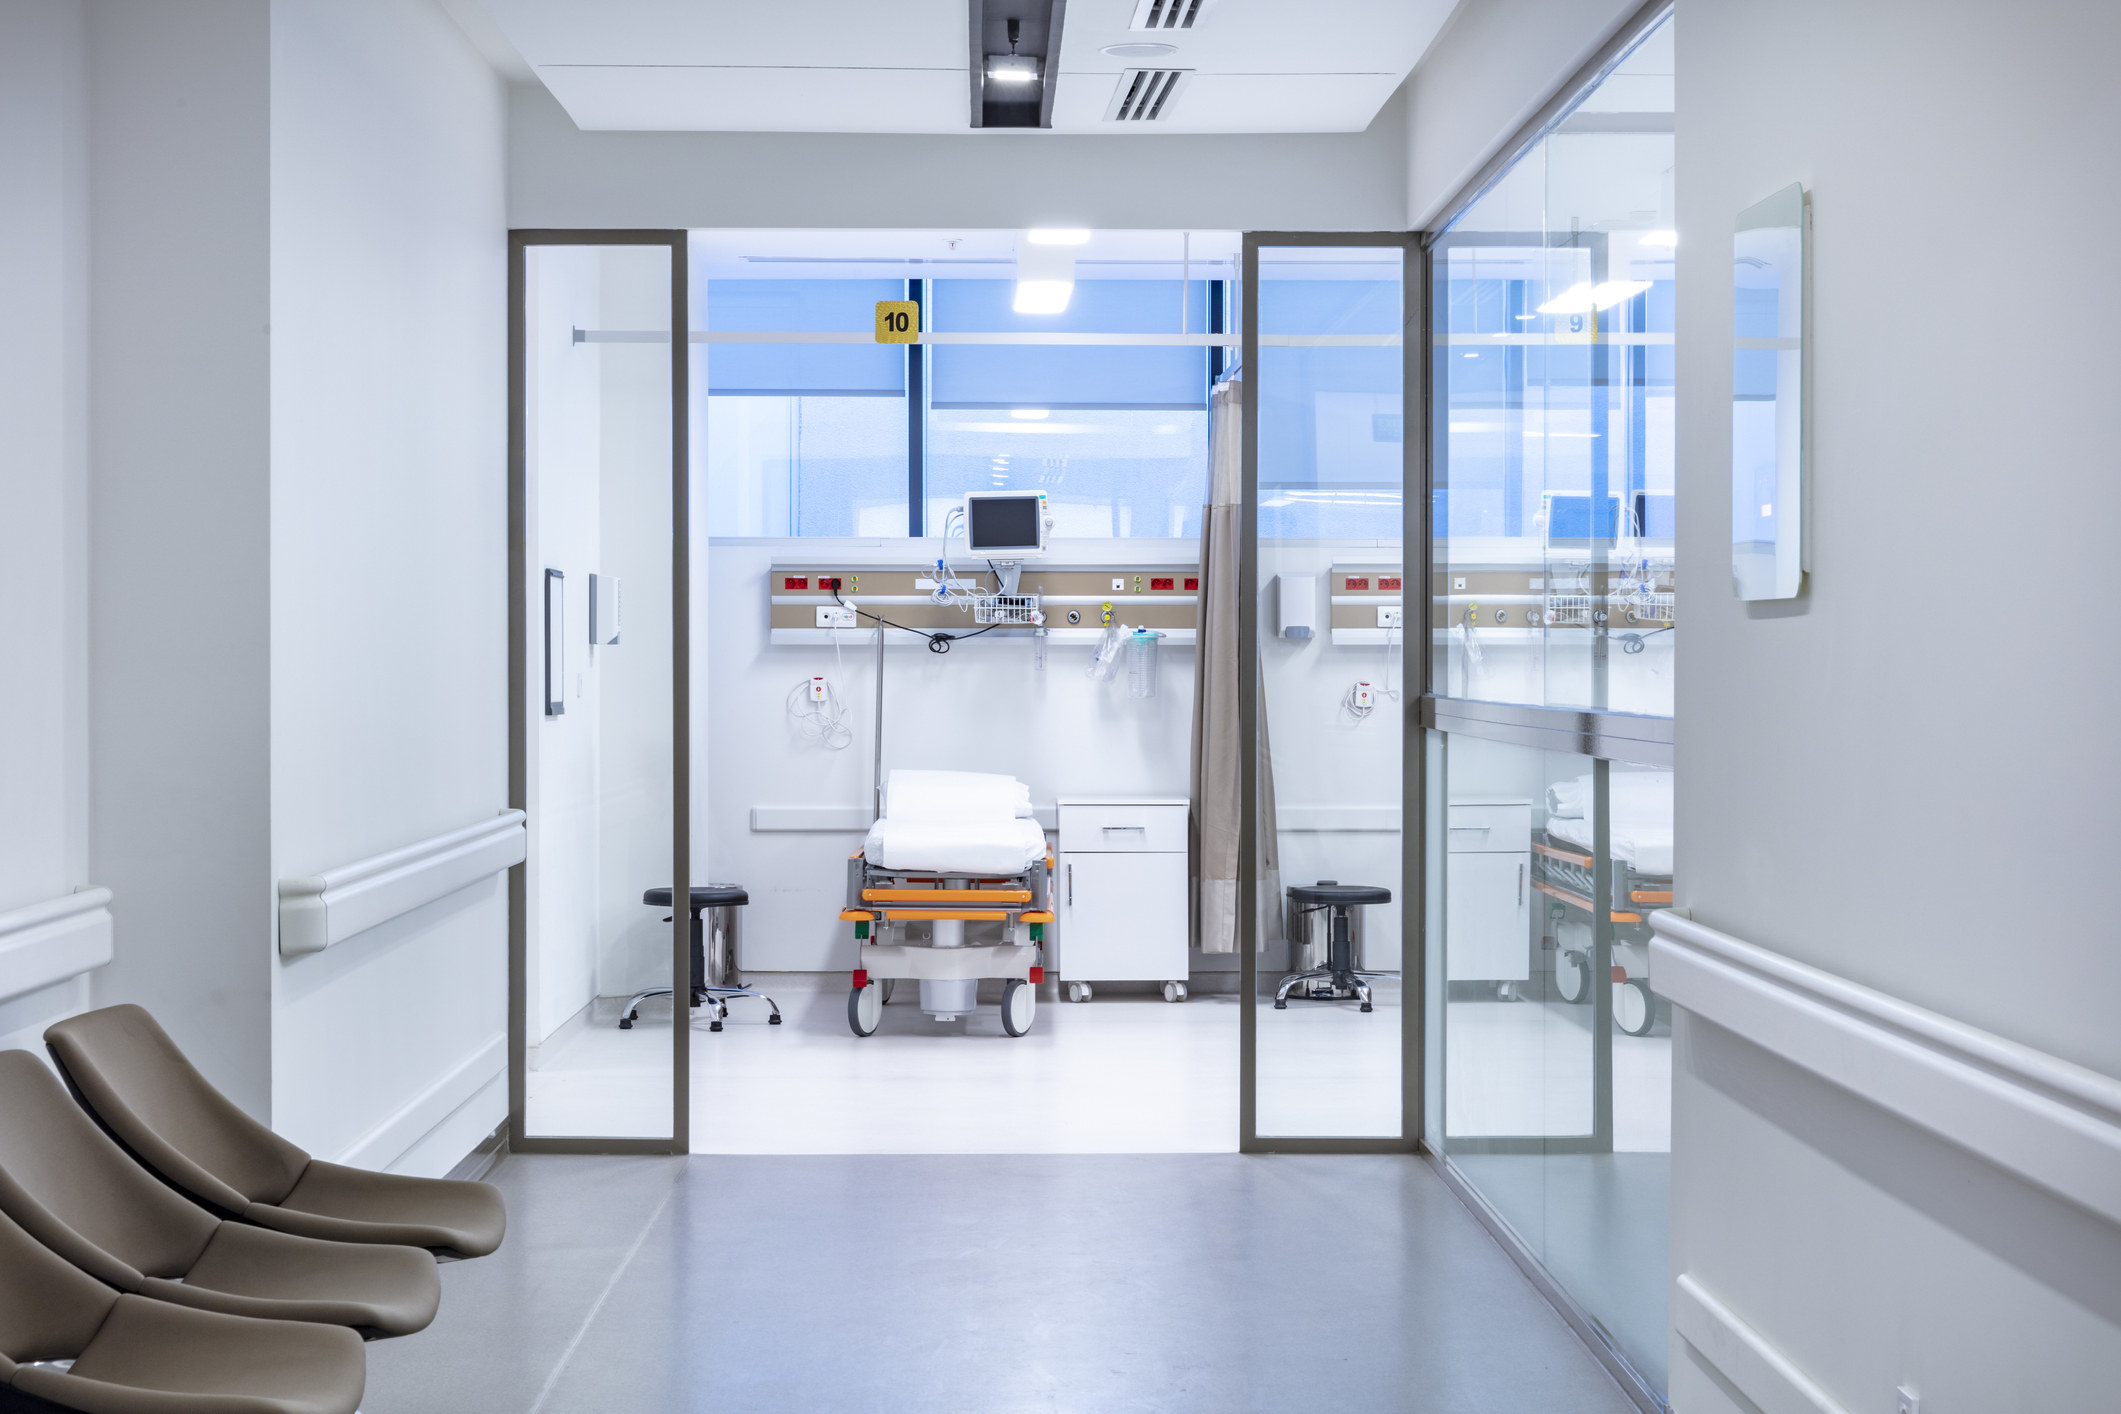 A stock image of the outside of an emergency room in a hospital